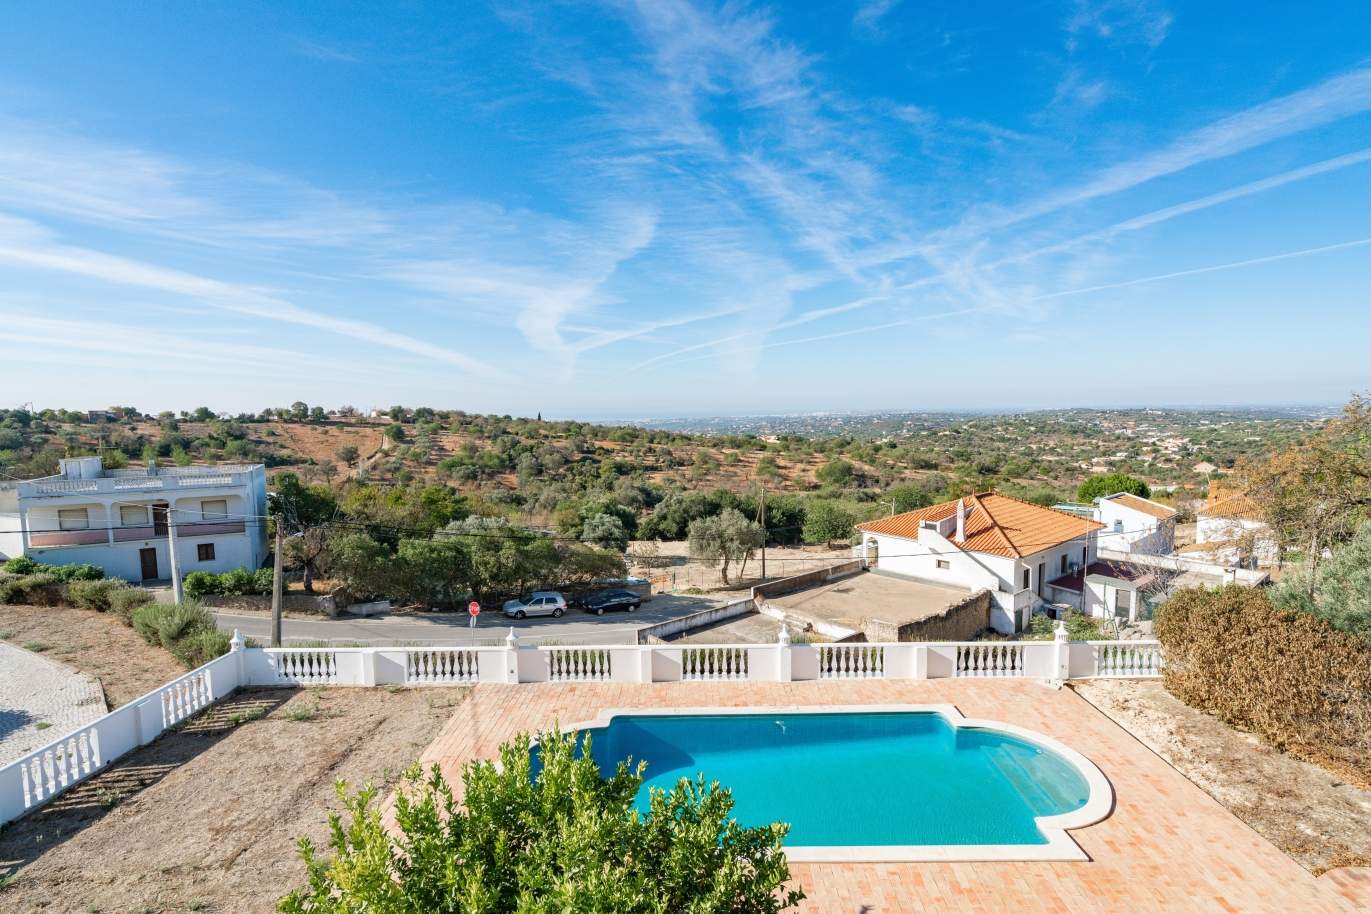 Villa with 4 Bedrooms, swimming pool and sea view, Boliqueime, Algarve_152482